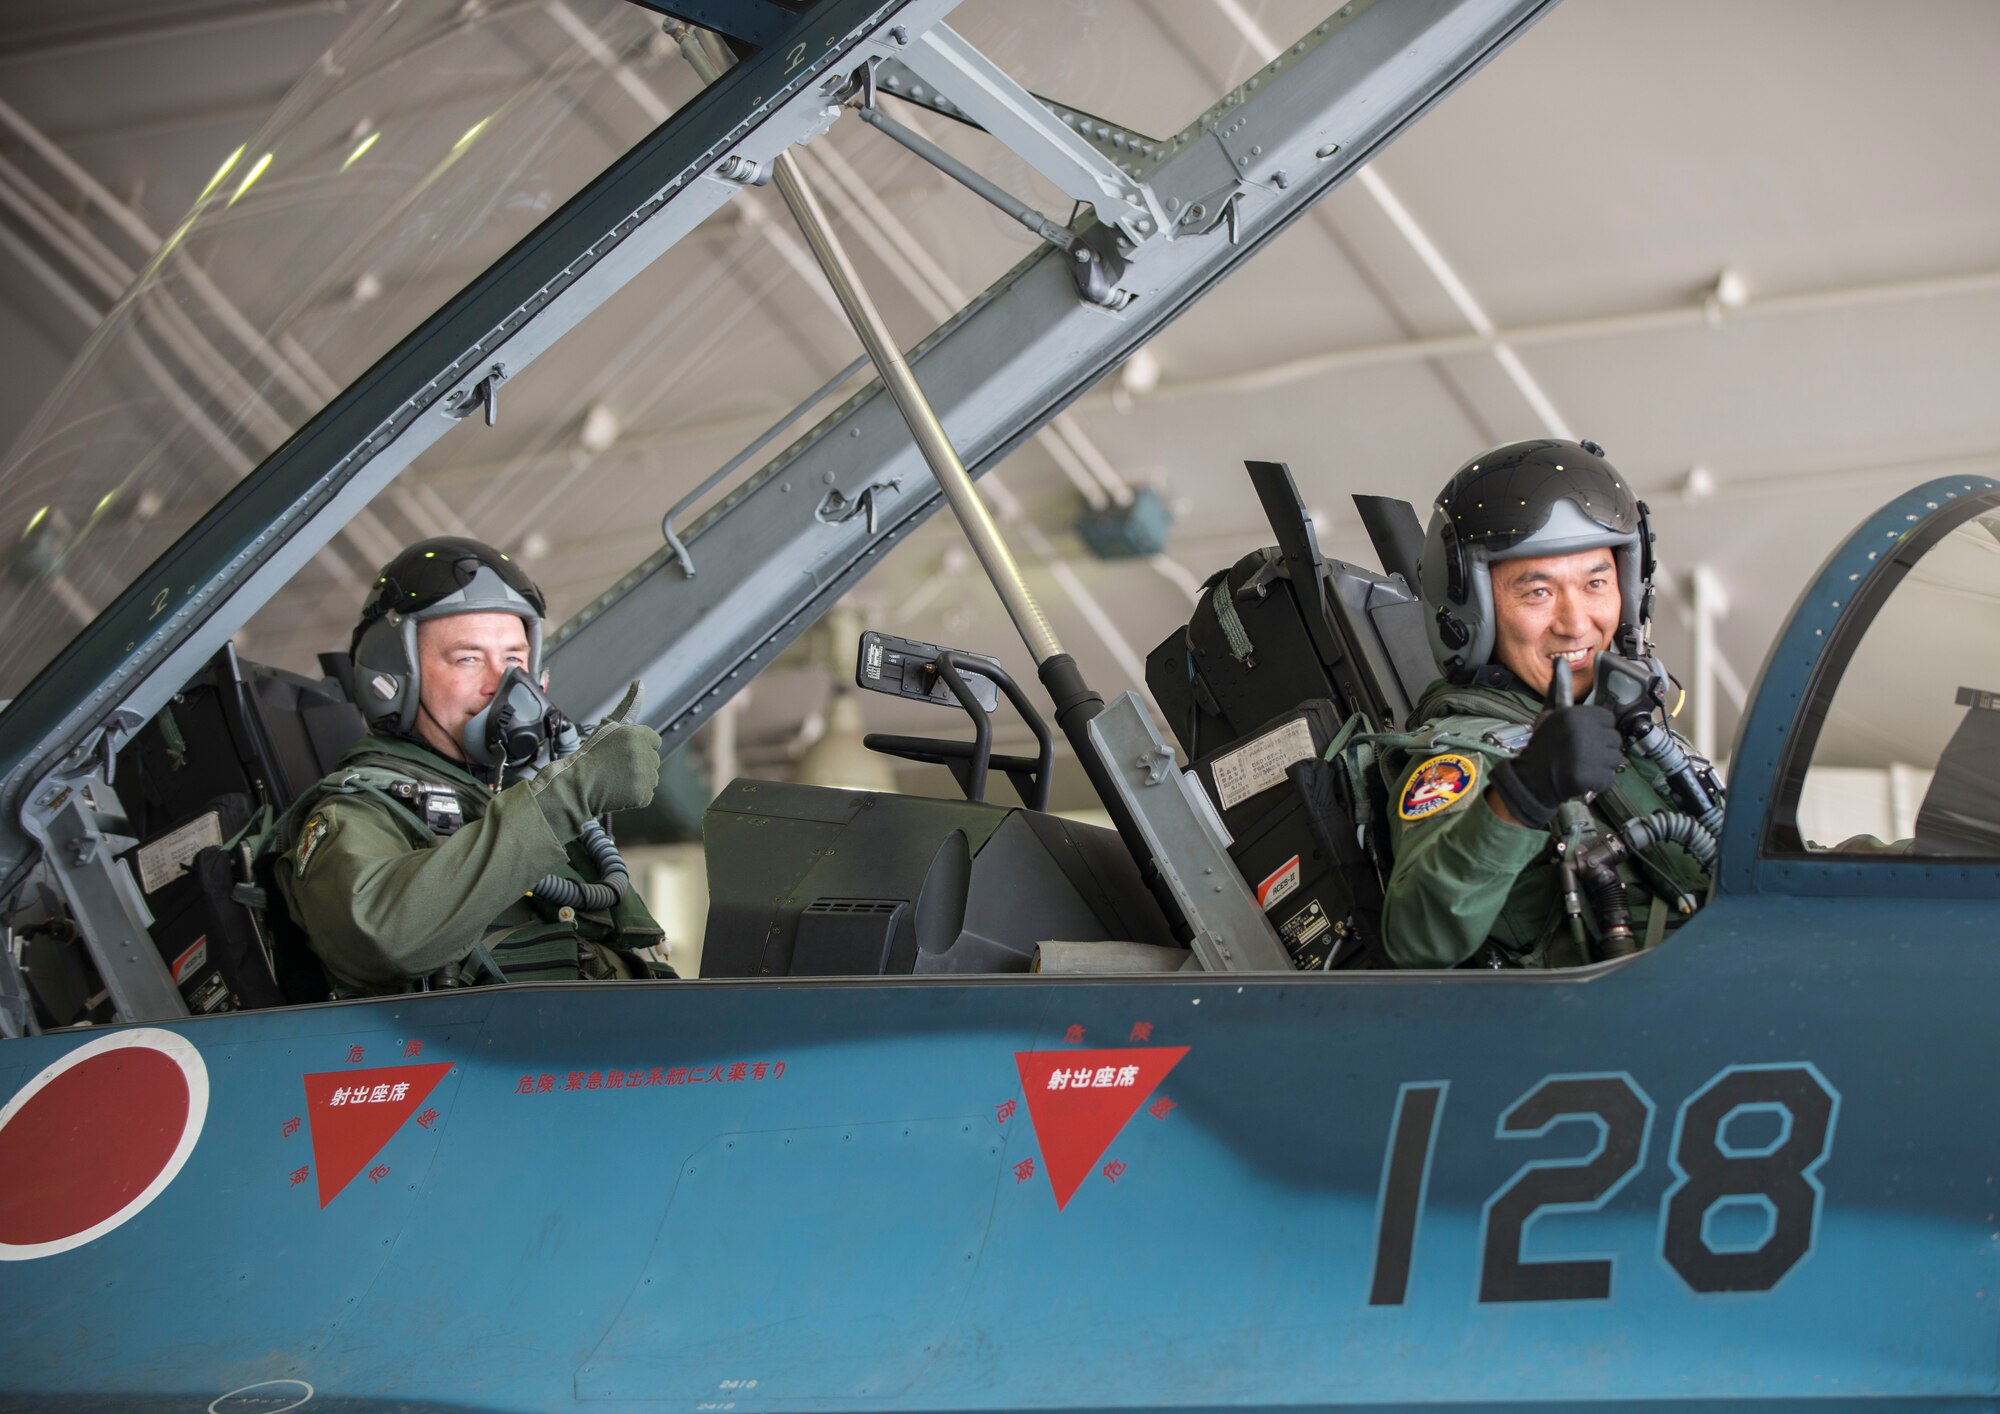 U.S. Air Force Col. Timothy Sundvall (left), the commander of the 35th Fighter Wing, and Japan Air Self-Defense Force Lt. Col. Mikio Kobayashi (right), the commander of the 3rd Fighter Squadron, give the "thumbs-up" in an F-2A at Misawa Air Base, Japan, June 22, 2016. Maj. Gen. Koji Imaki, the commander of the 3rd Air Wing, invited Sundvall to fly in an F-2A with the 3rd FS, giving him the unique opportunity to see firsthand how his bilateral counterparts operate in their day-to-day mission. (U.S. Air Force photo by Senior Airman Brittany A. Chase)